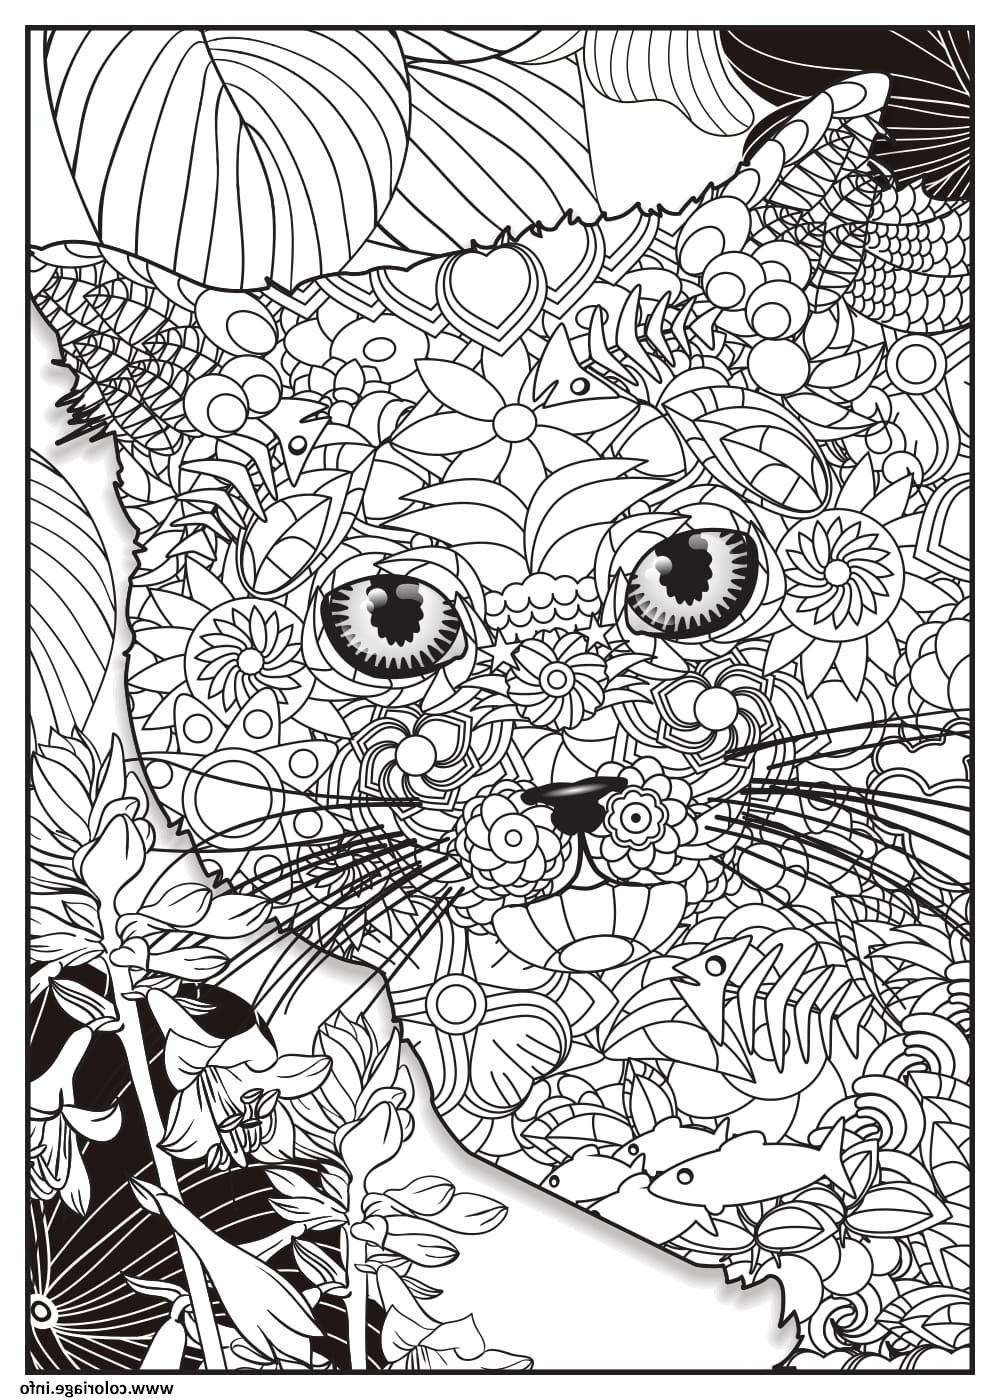 chat british shorthair adulte animaux coloriage dessin